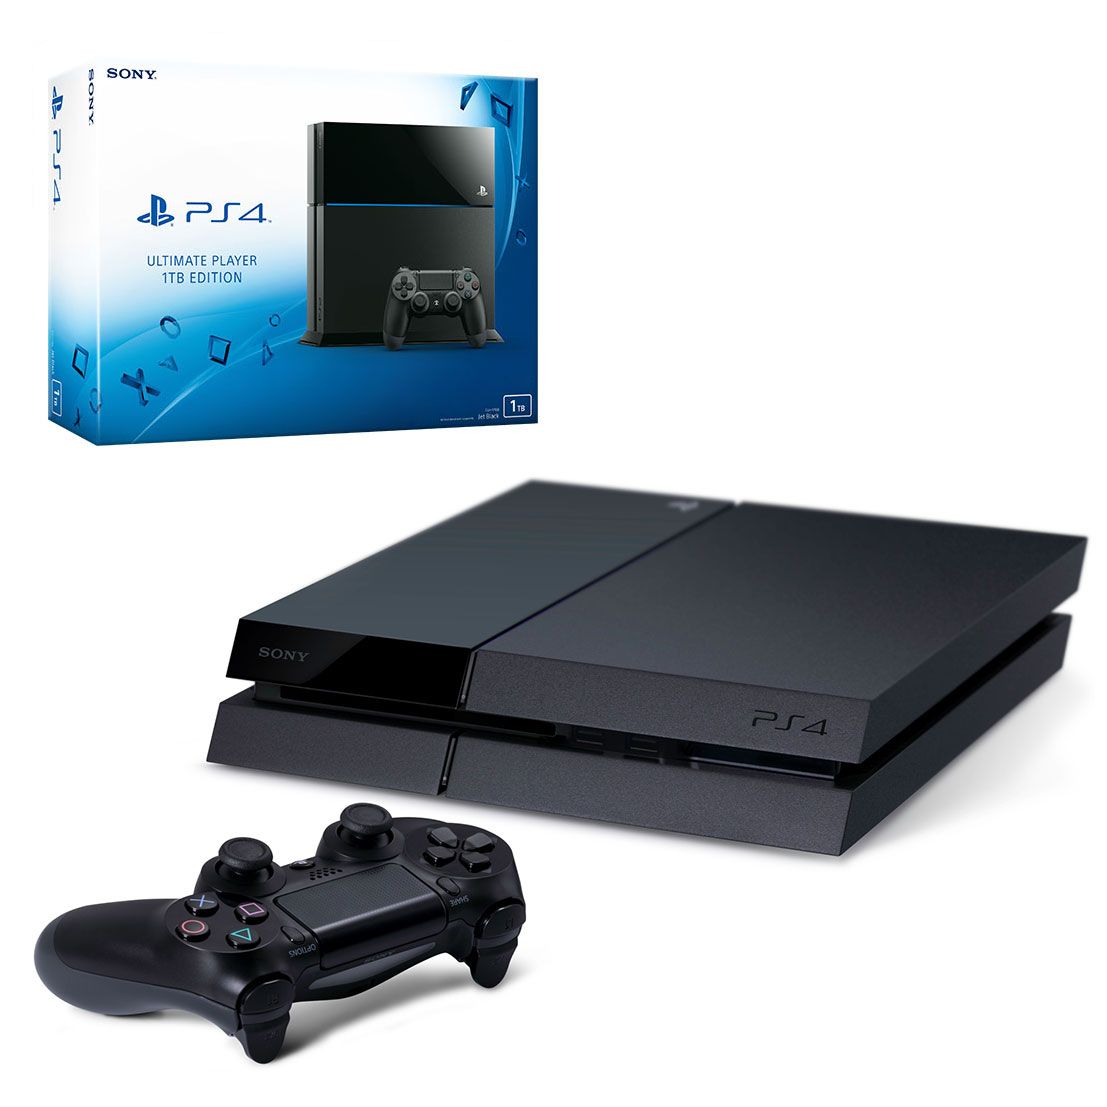 Ps4 ultimate edition. Ps4 Ultimate Player 1tb. Ps4 Ultimate Edition 1tb. Стационарная приставка ps4. Sony PLAYSTATION 1000.